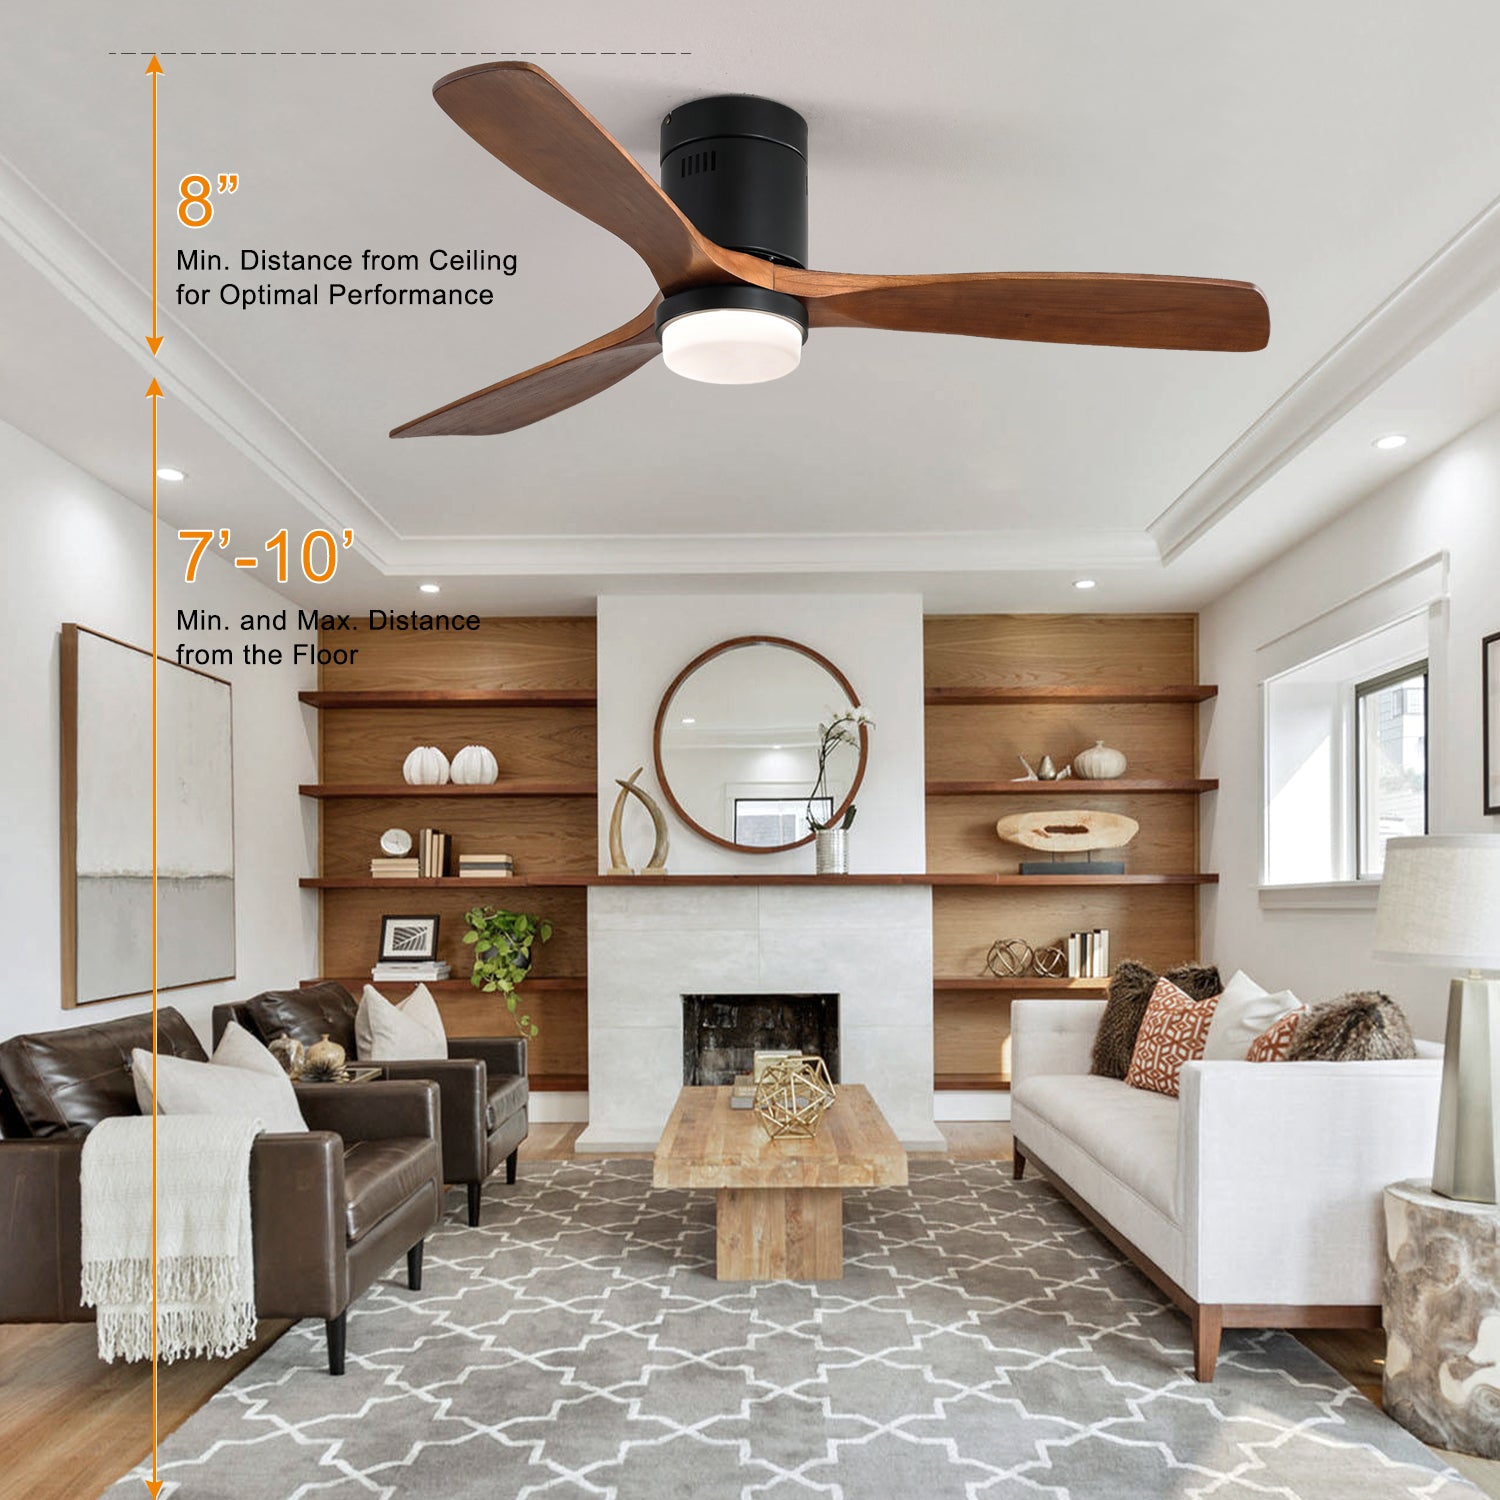 Low Profile Ceiling Fan With Lights 3 Carved Wood Fan Blade Noiseless Reversible Motor Remote Control With Light - Tonkn